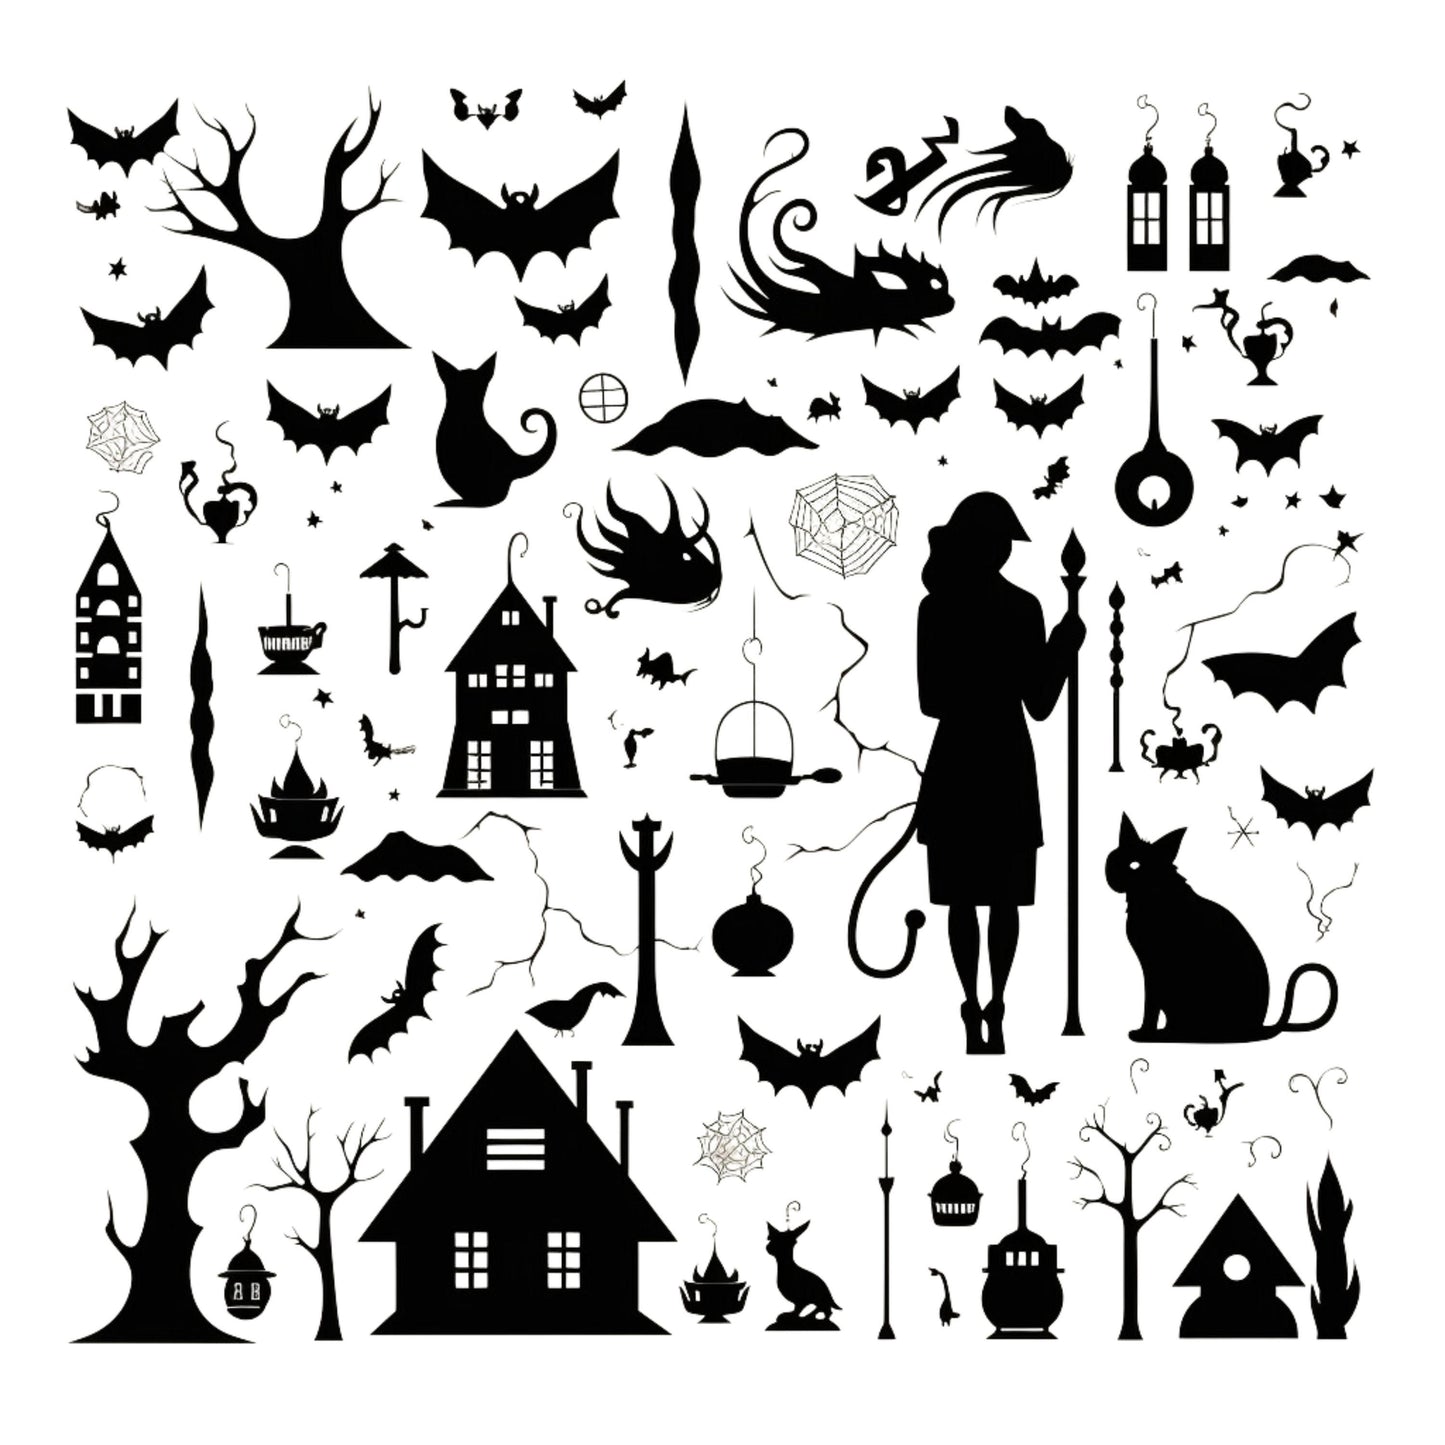 Explore your creativity with our Cricut Halloween SVG bundle! Design eerie t-shirts, favor boxes, signs & more. Ideal for DIY projects.